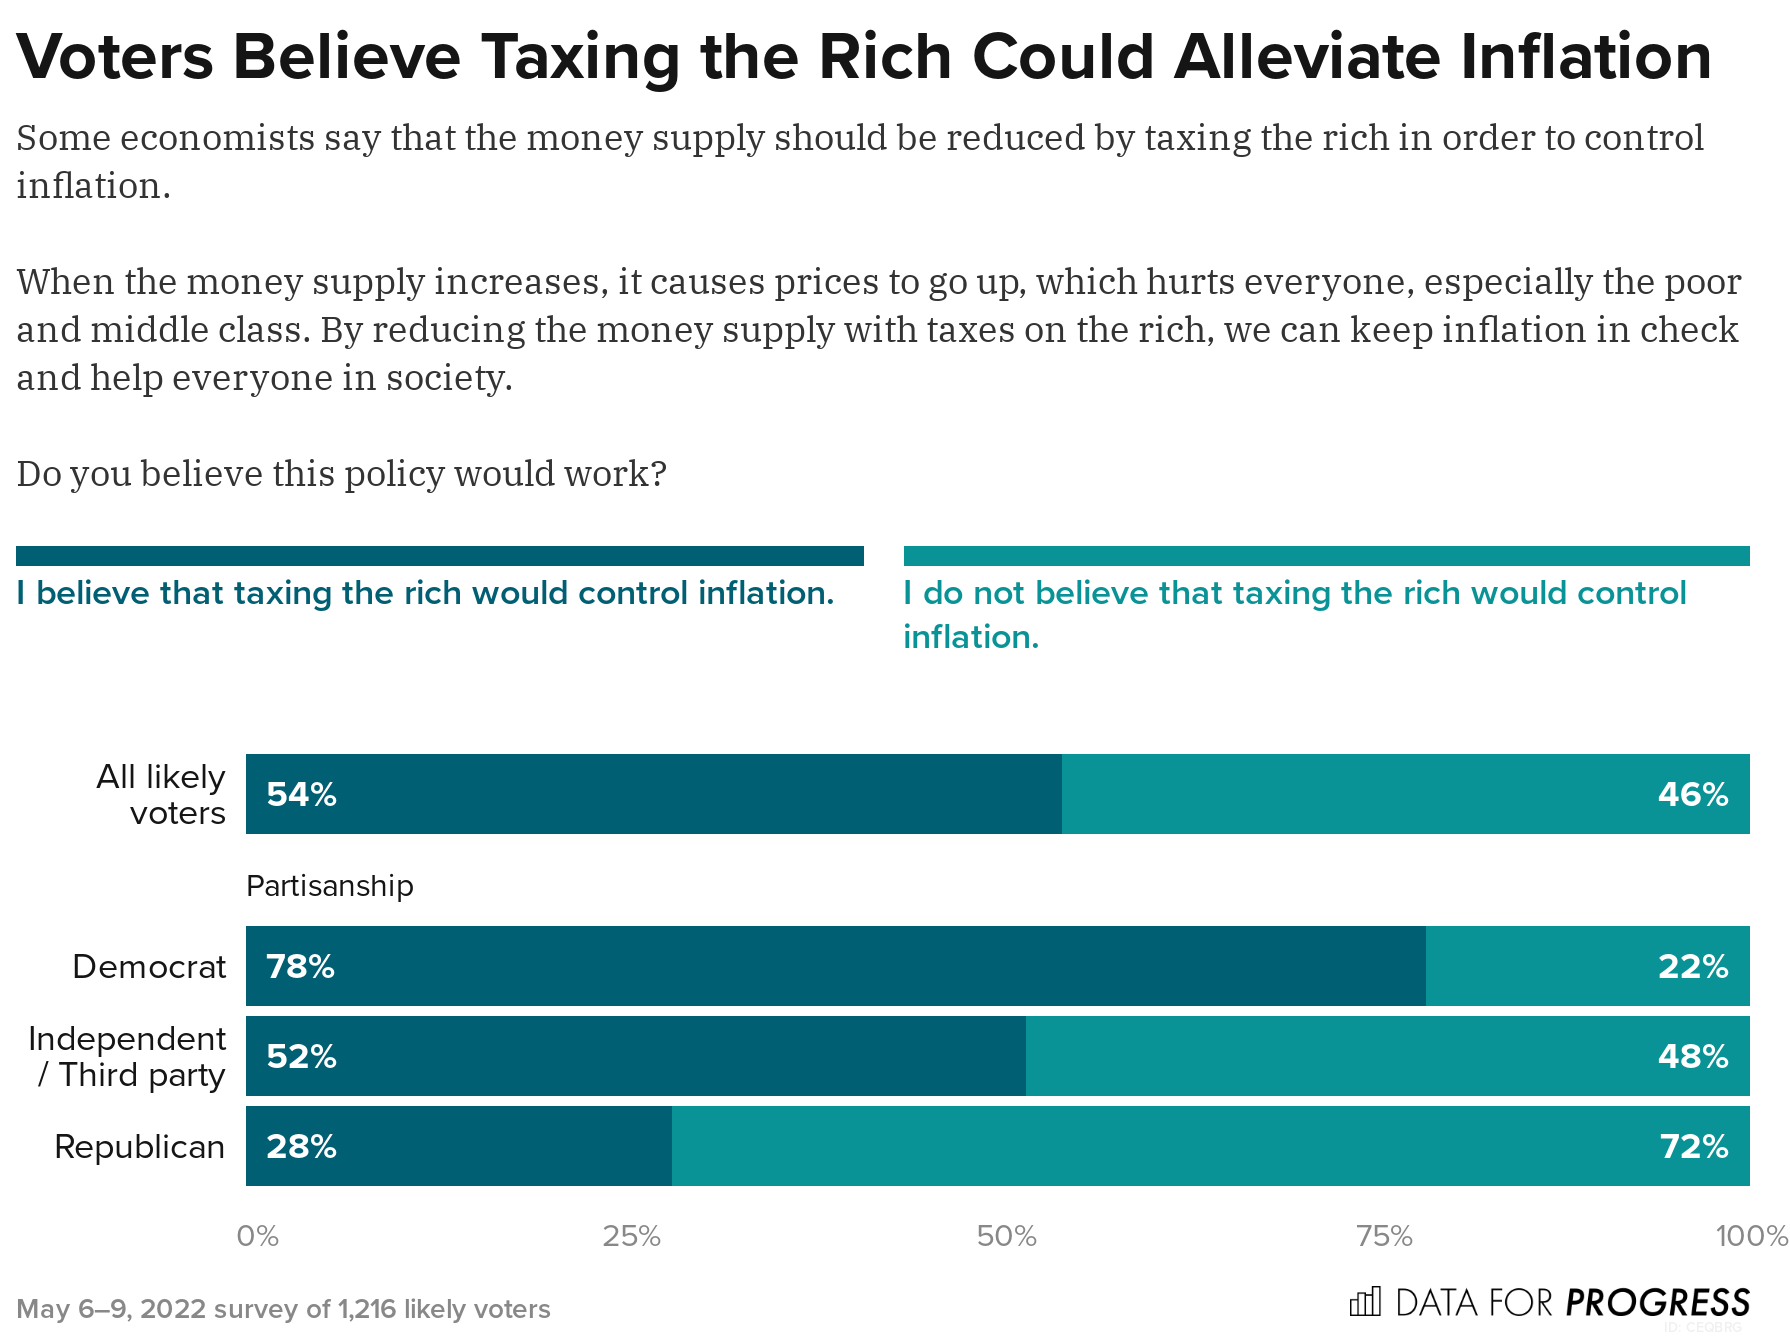 voters-agree-that-taxing-the-rich-could-help-alleviate-inflation